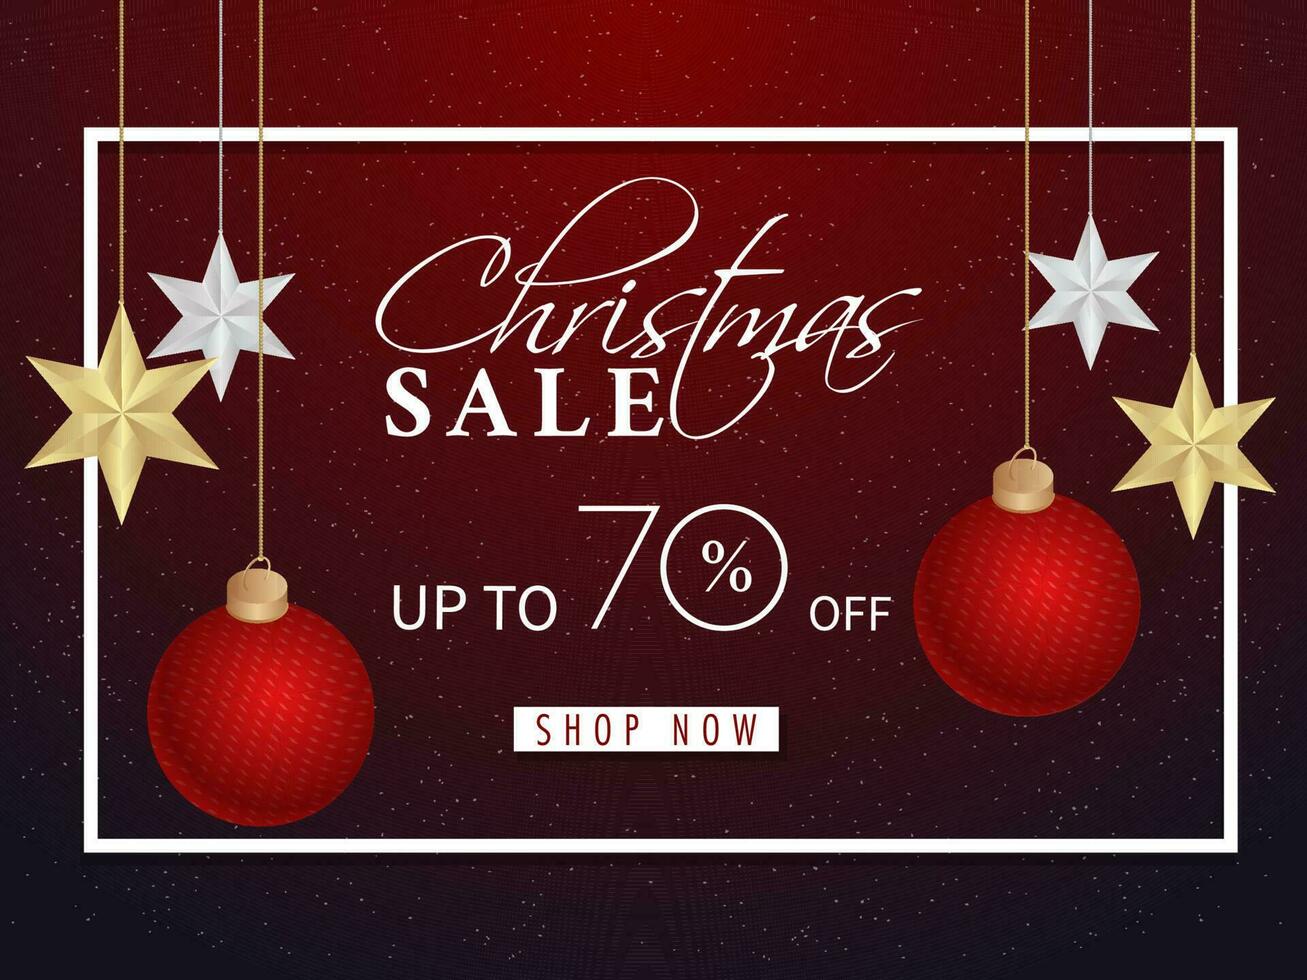 Christmas Sale banner or poster design with discount offer, bauble balls and stars hang decorated on brown background. vector